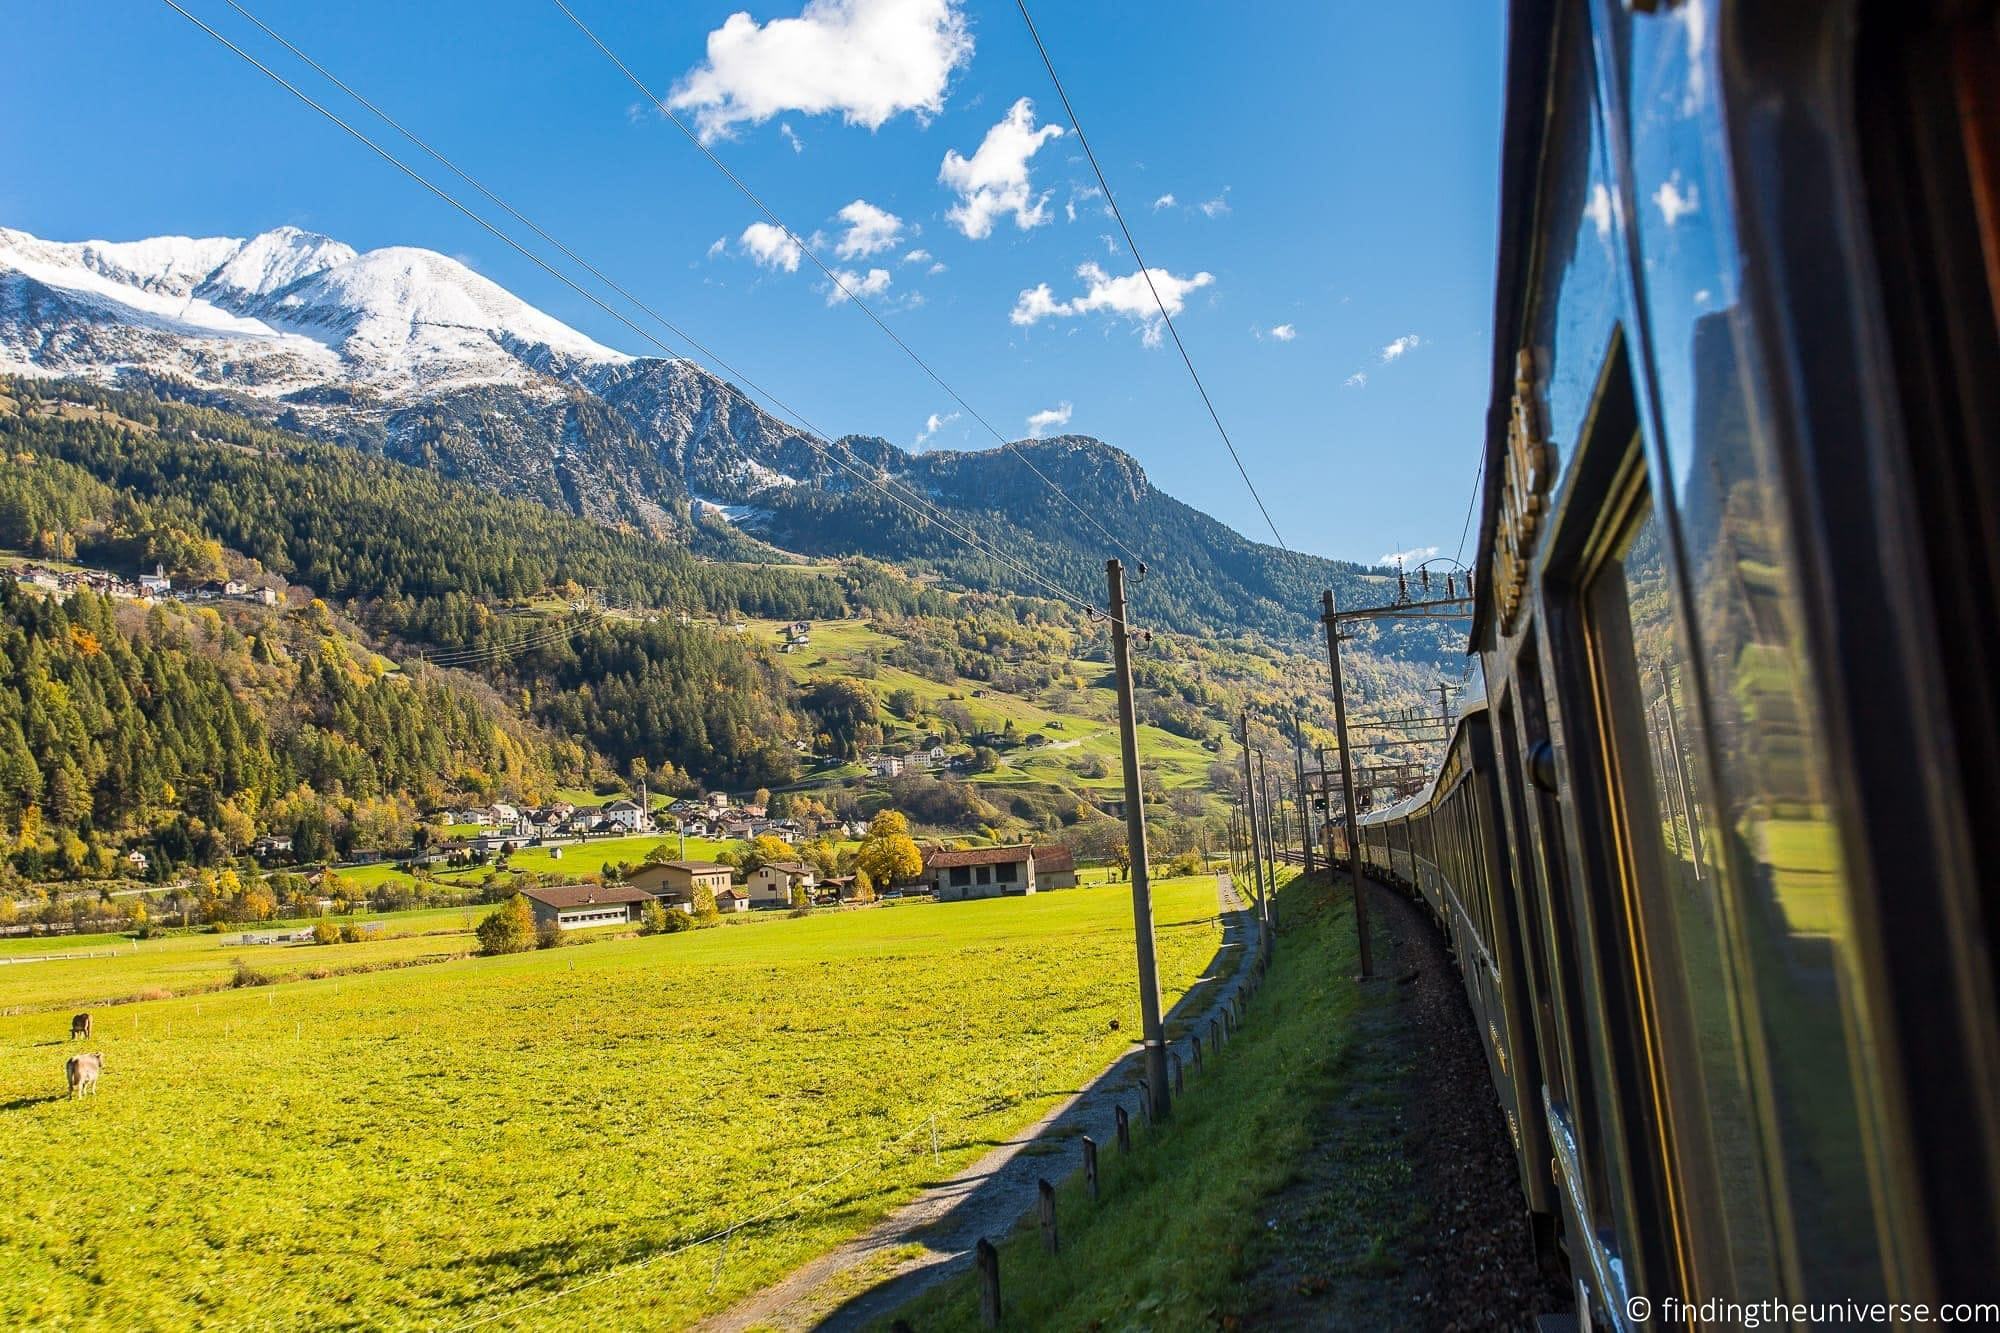 Venice Simplon-Orient-Express: 25 things you must know, British GQ